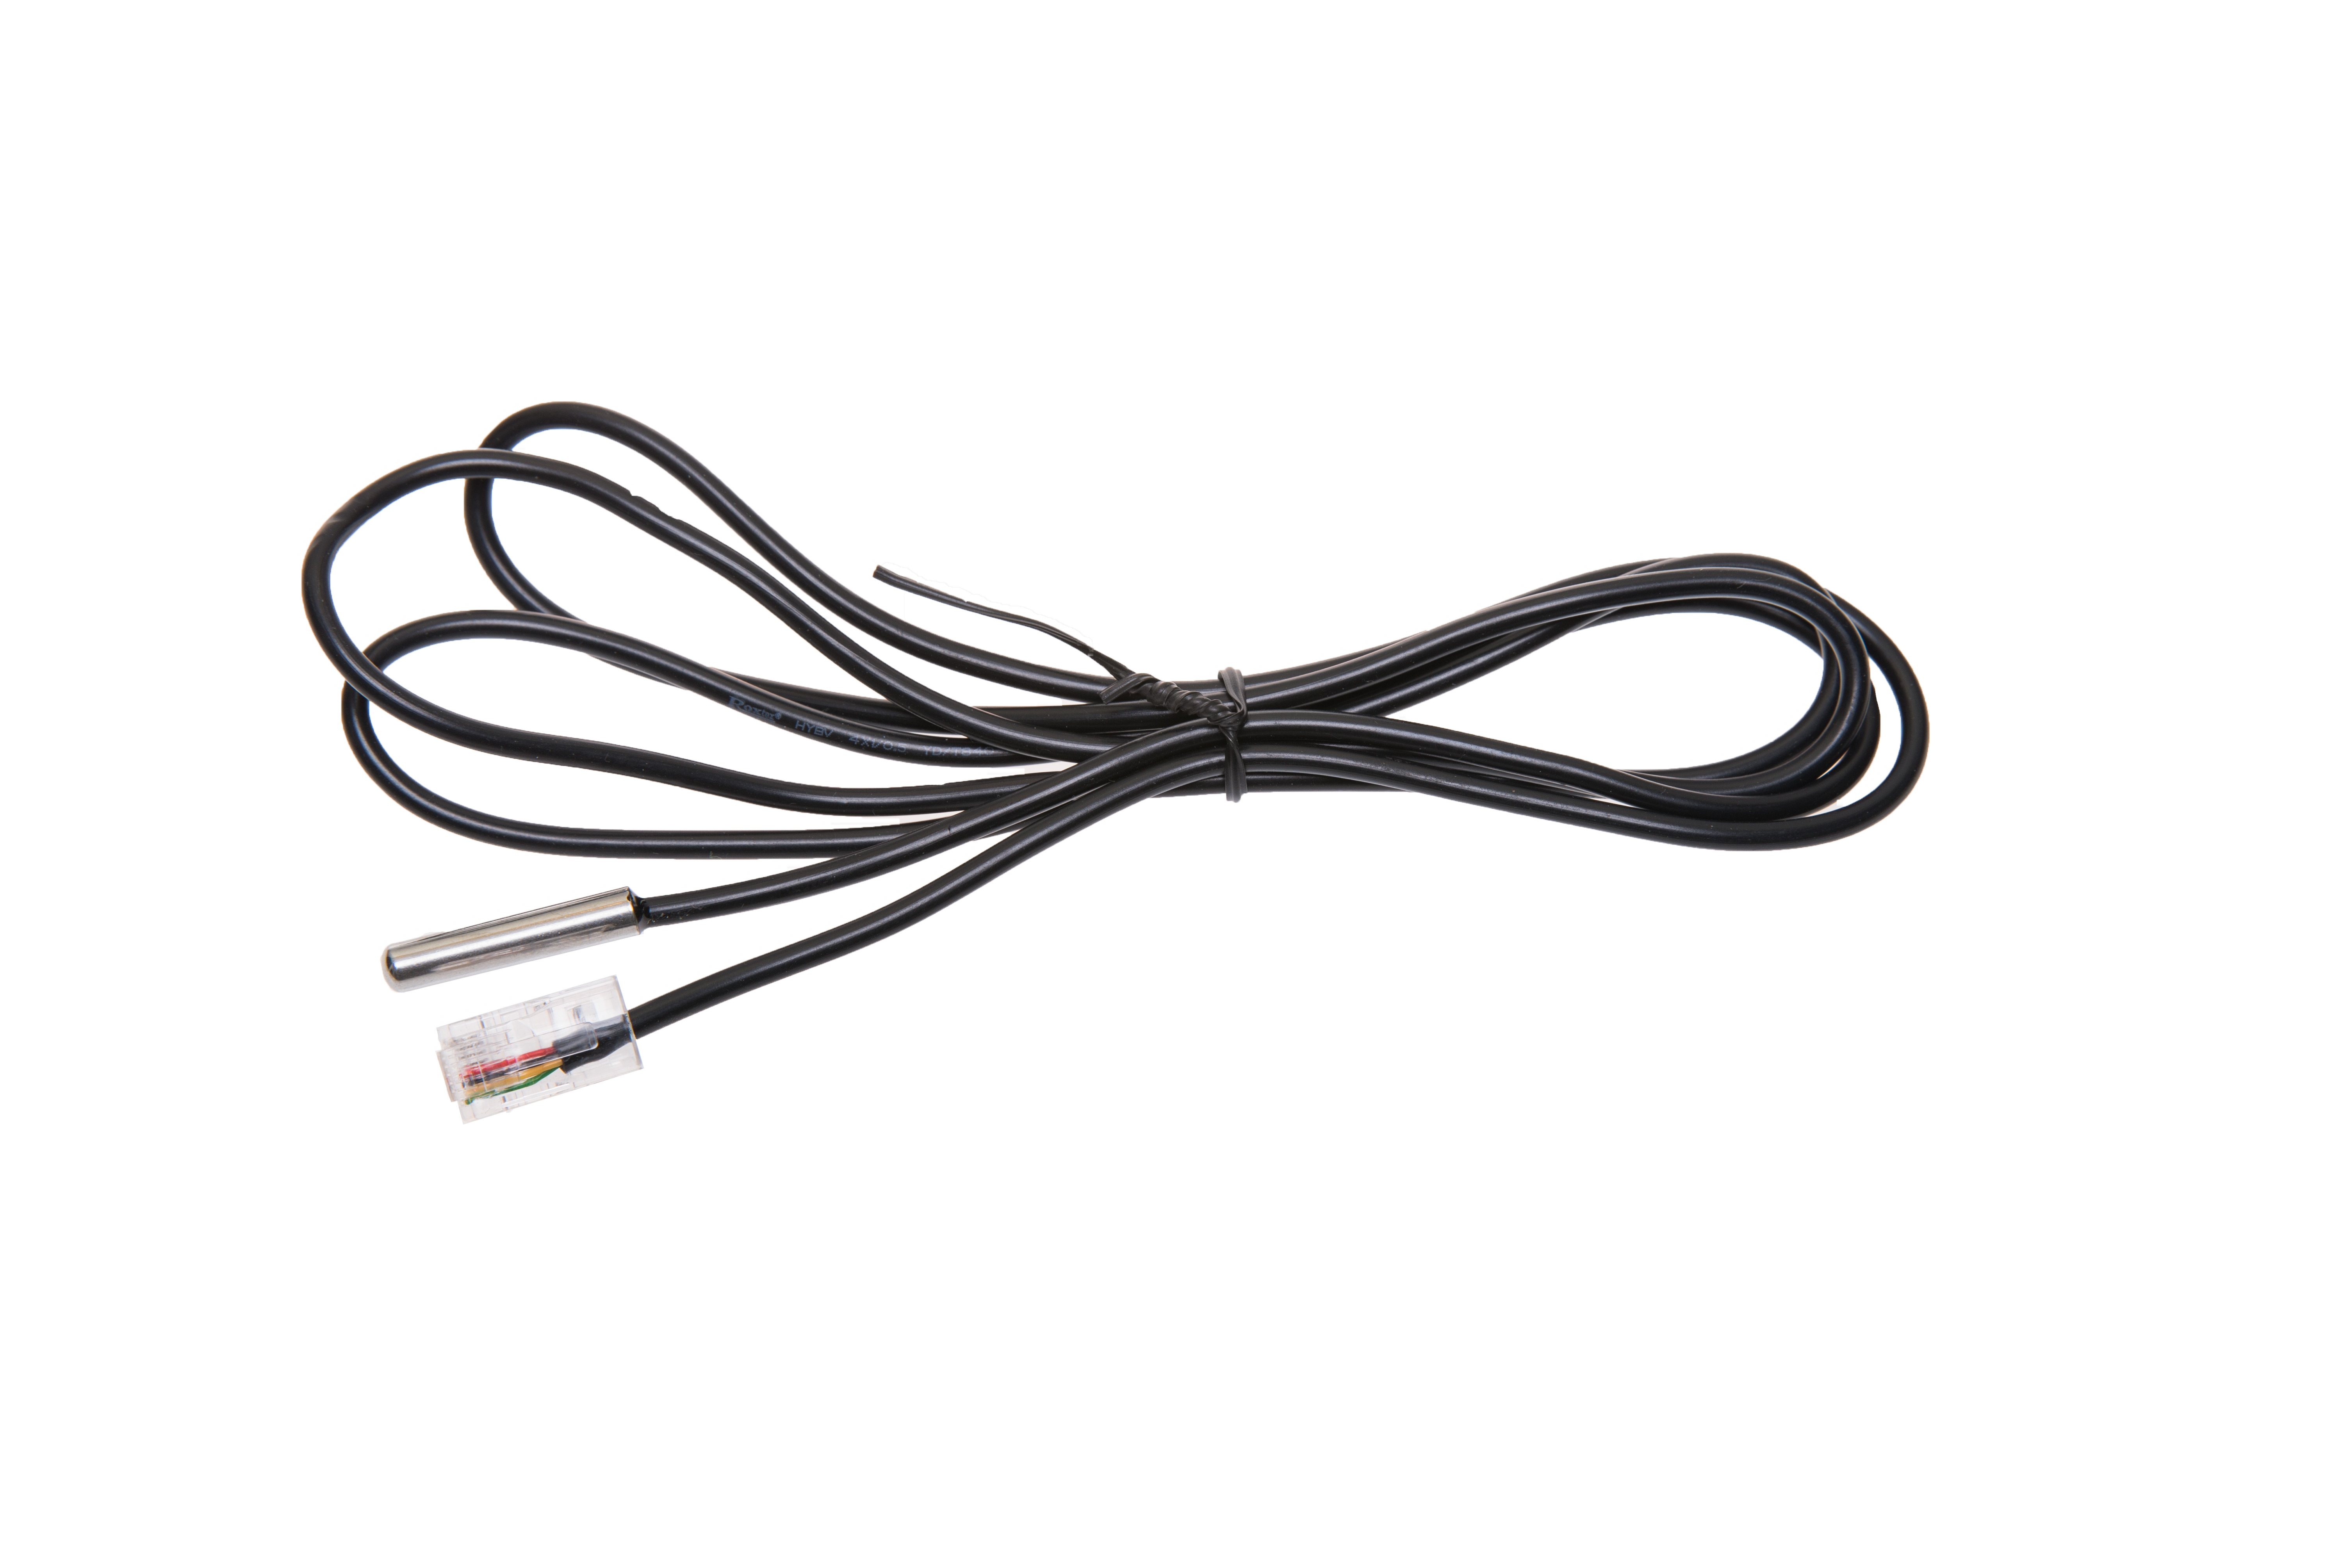 1-Wire temperature sensor for indoor and outdoor usage